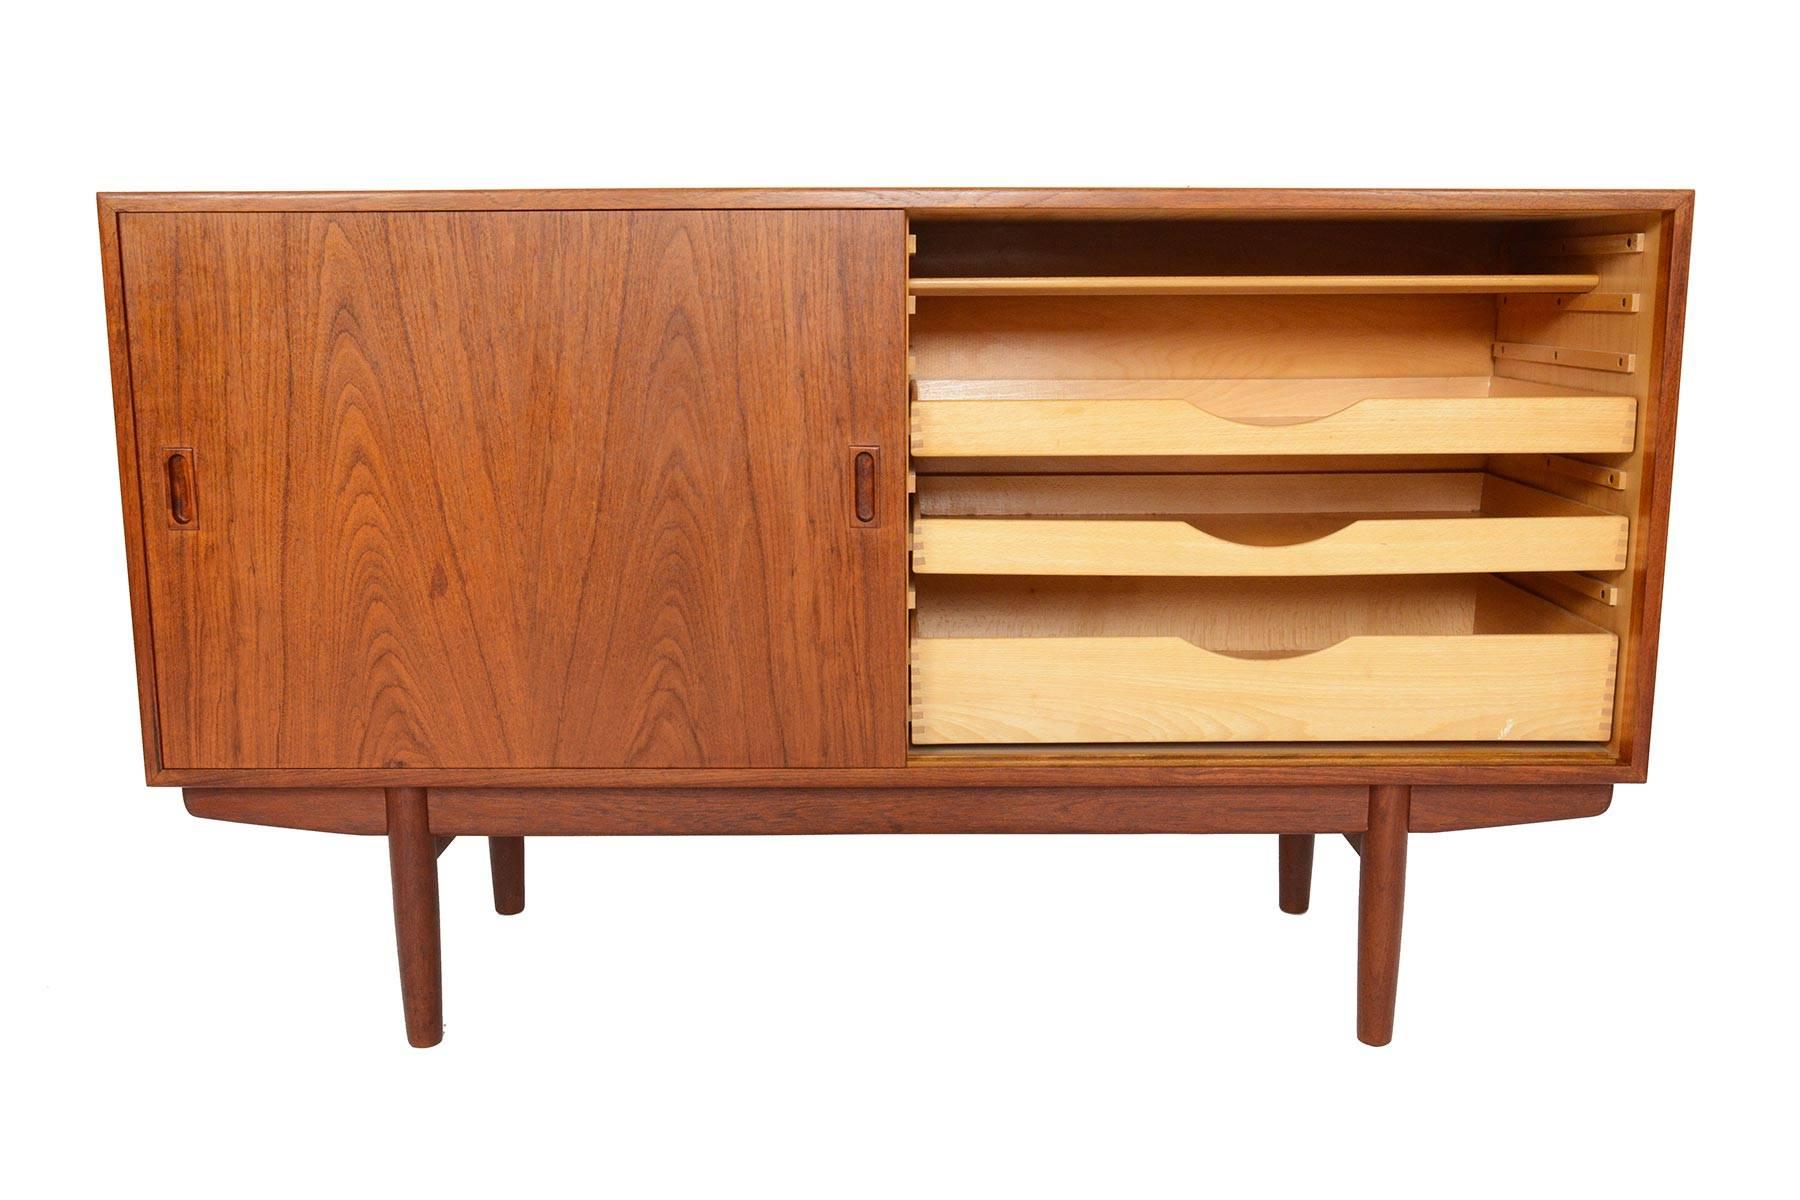 This Danish modern sliding door credenza in teak was designed by Børge Mogensen for Søborg Møbelfabrik. Designed in 1953, this piece features the designer's signature base and solid joinery. Two doors slide open to reveal three adjustable shelves